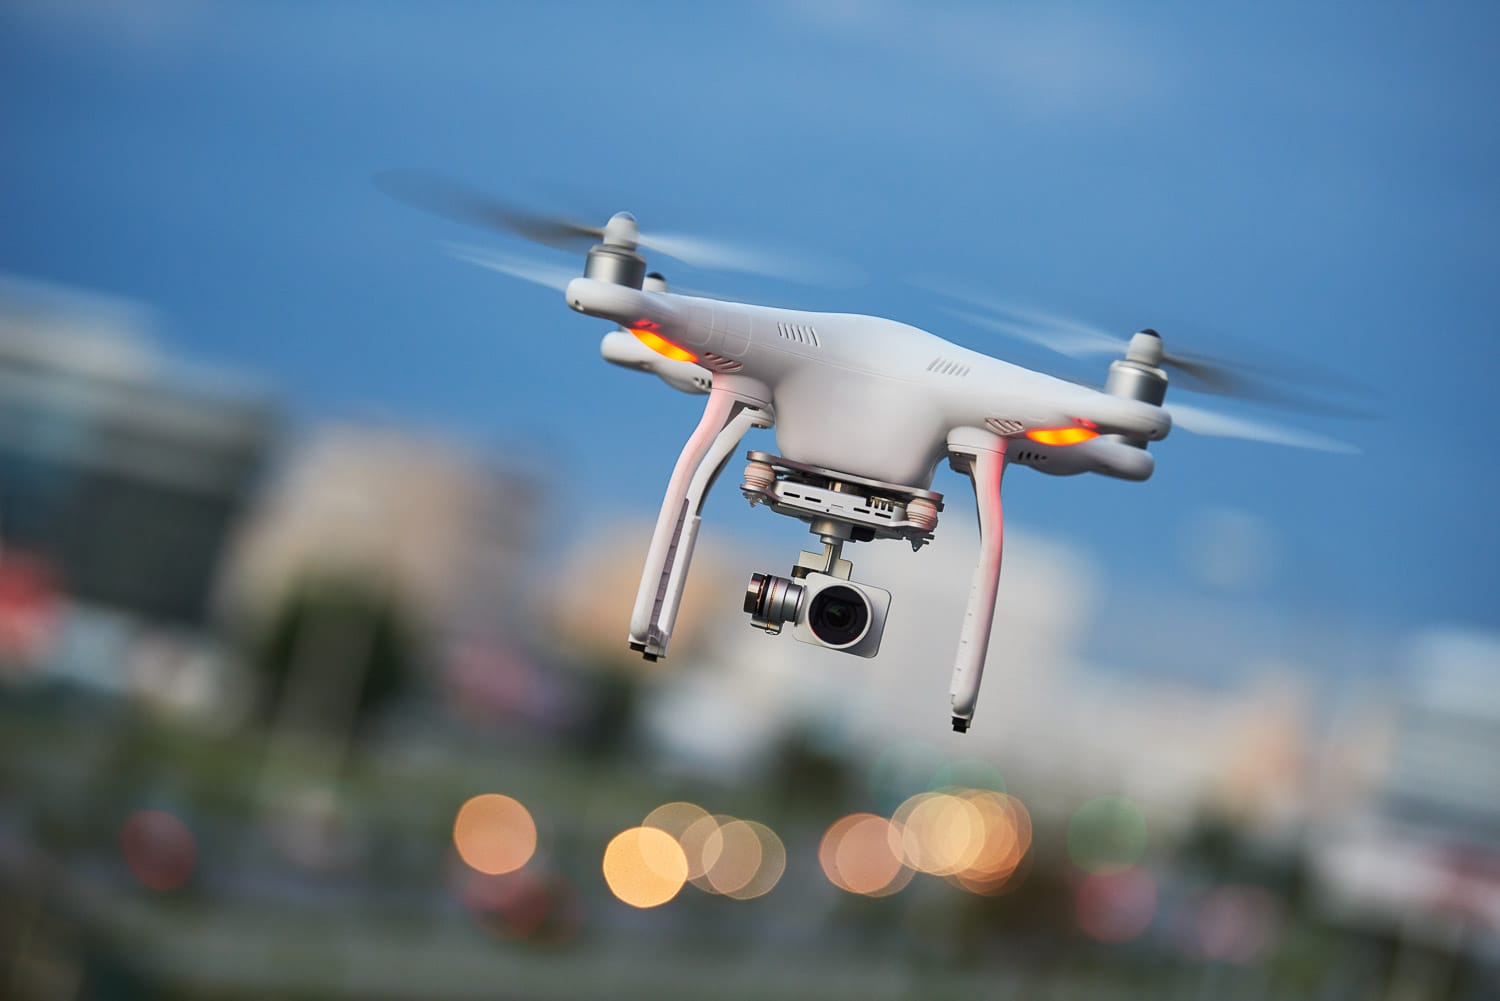 Quadcopter drone with camera flying against a blurred cityscape background.